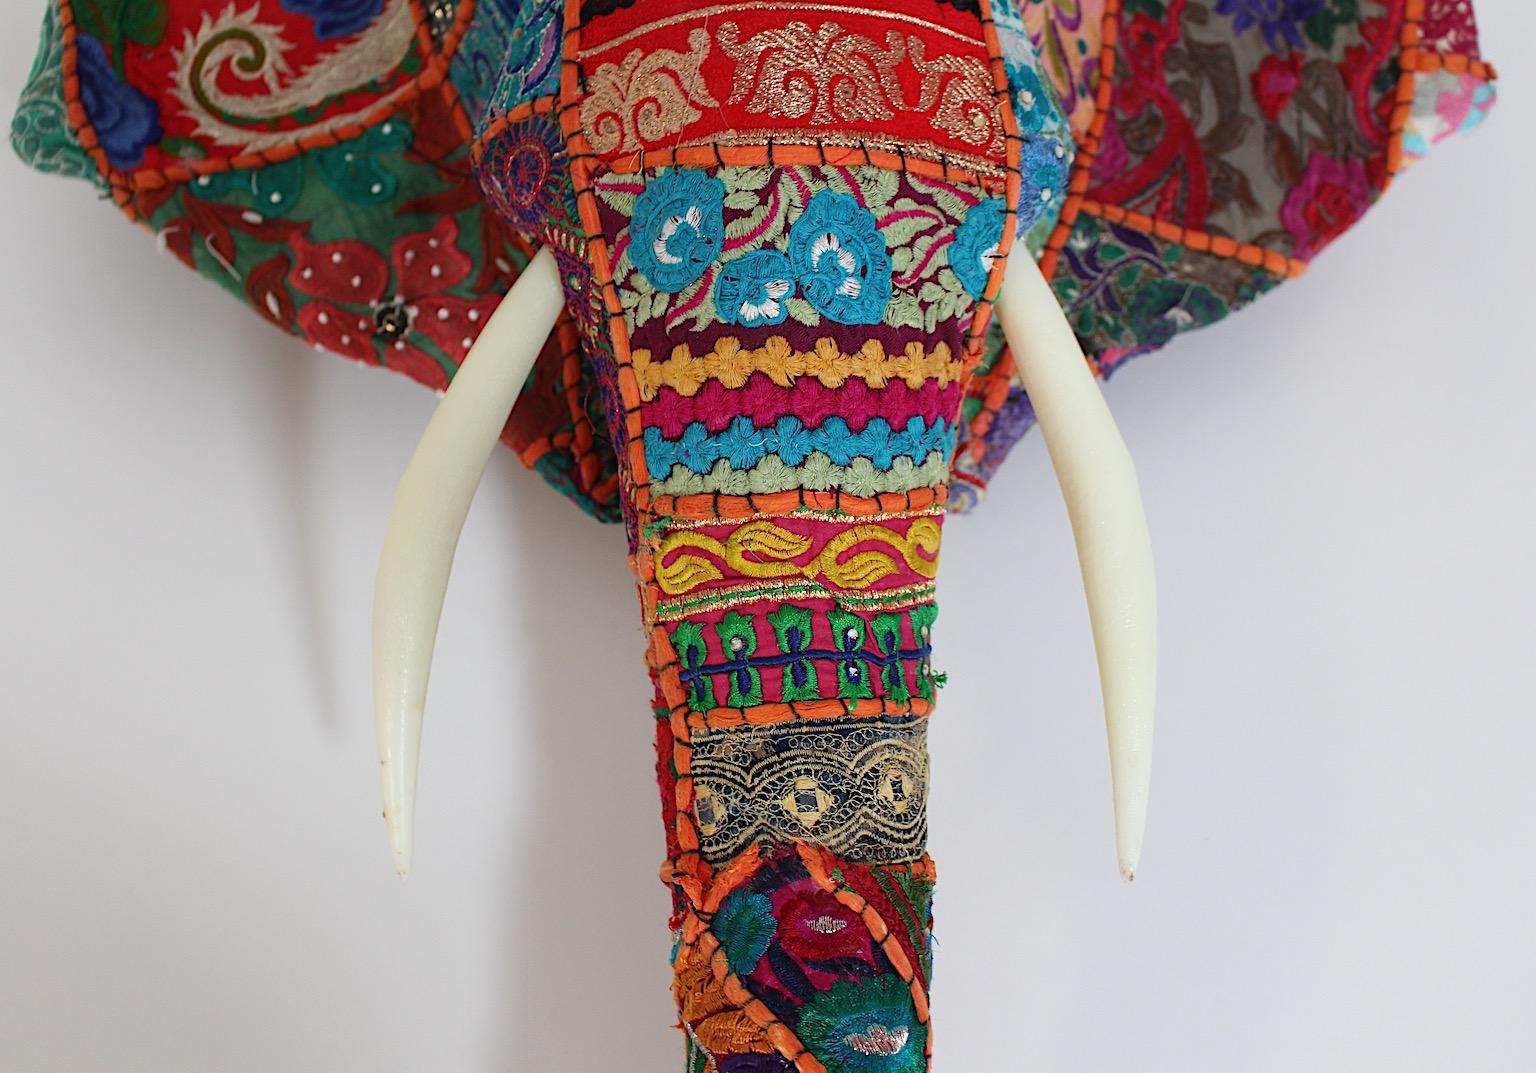 Animal Folk Art Vintage Patchwork Fabric Embroidery Elephant Head c 1980s India In Good Condition For Sale In Vienna, AT